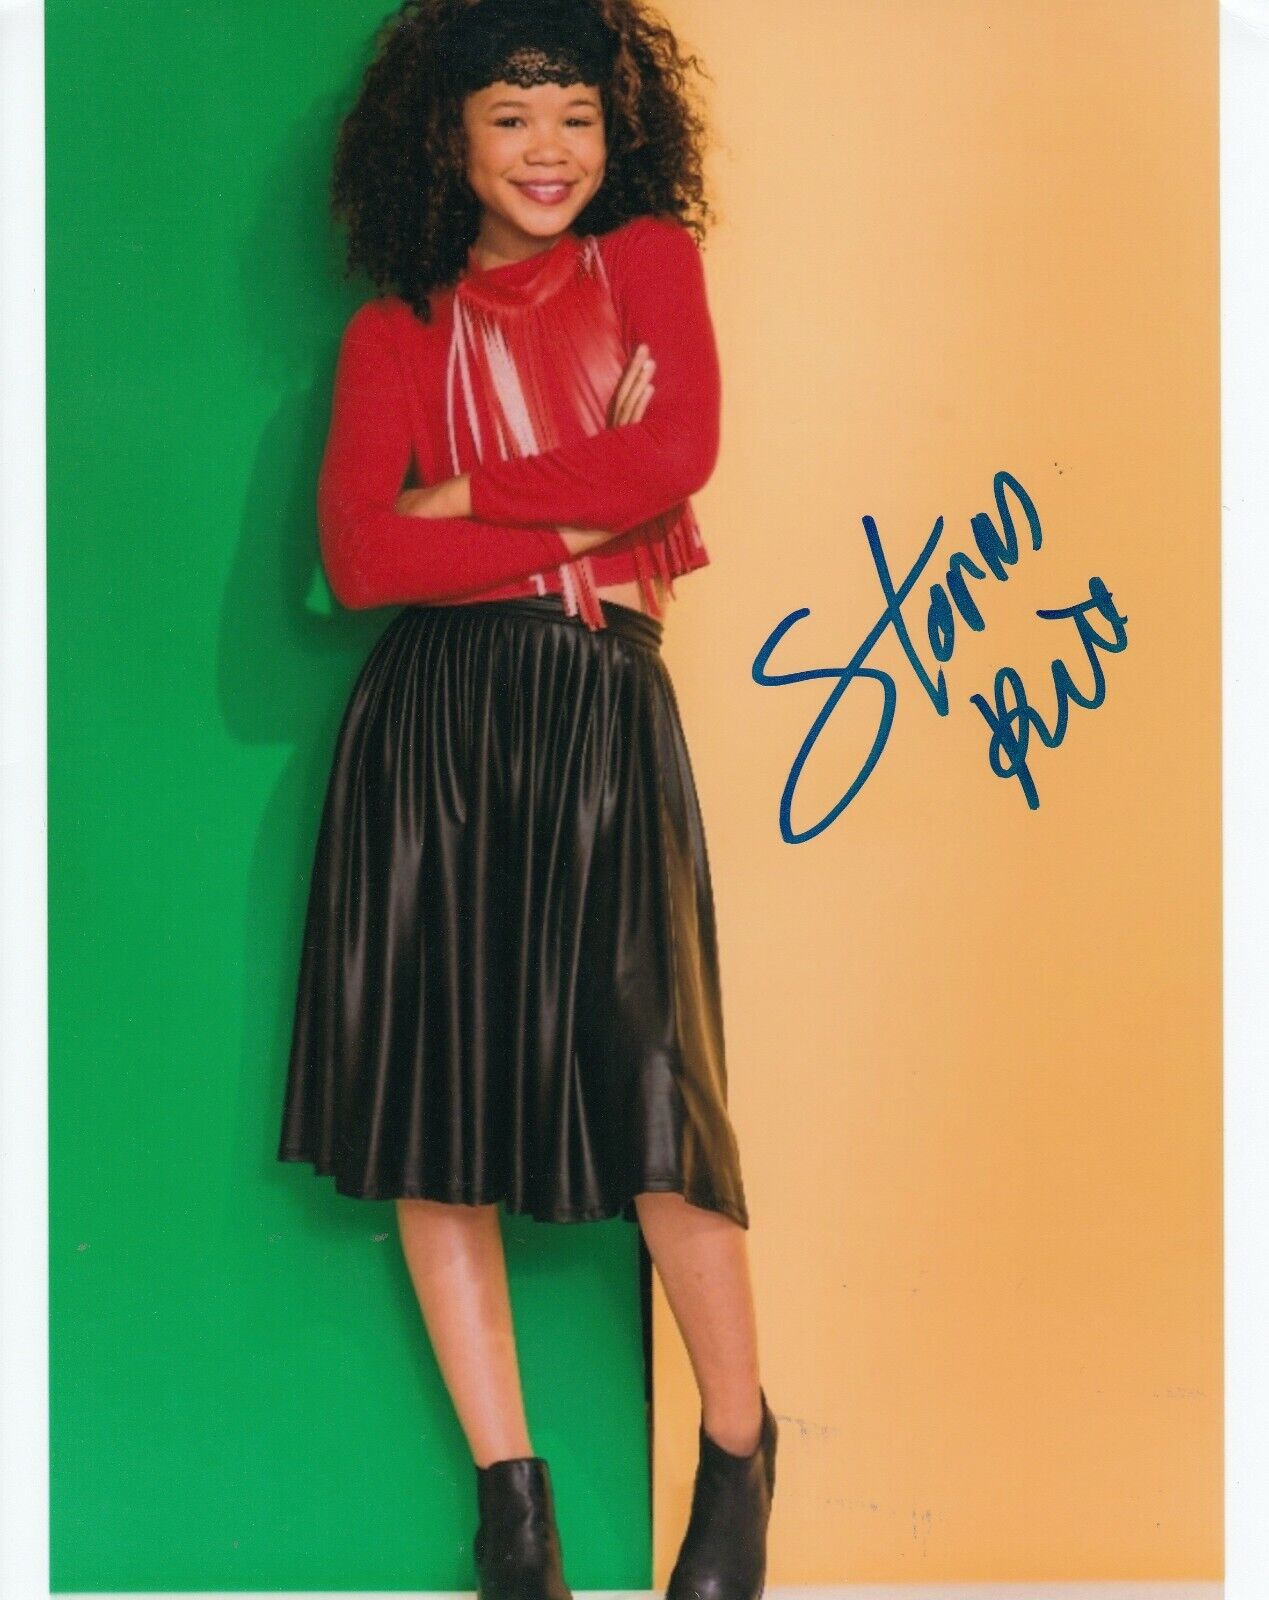 STORM REID signed (A WRINKLE IN TIME) Movie Star 8X10 Photo Poster painting *SLEIGHT* W/COA #2